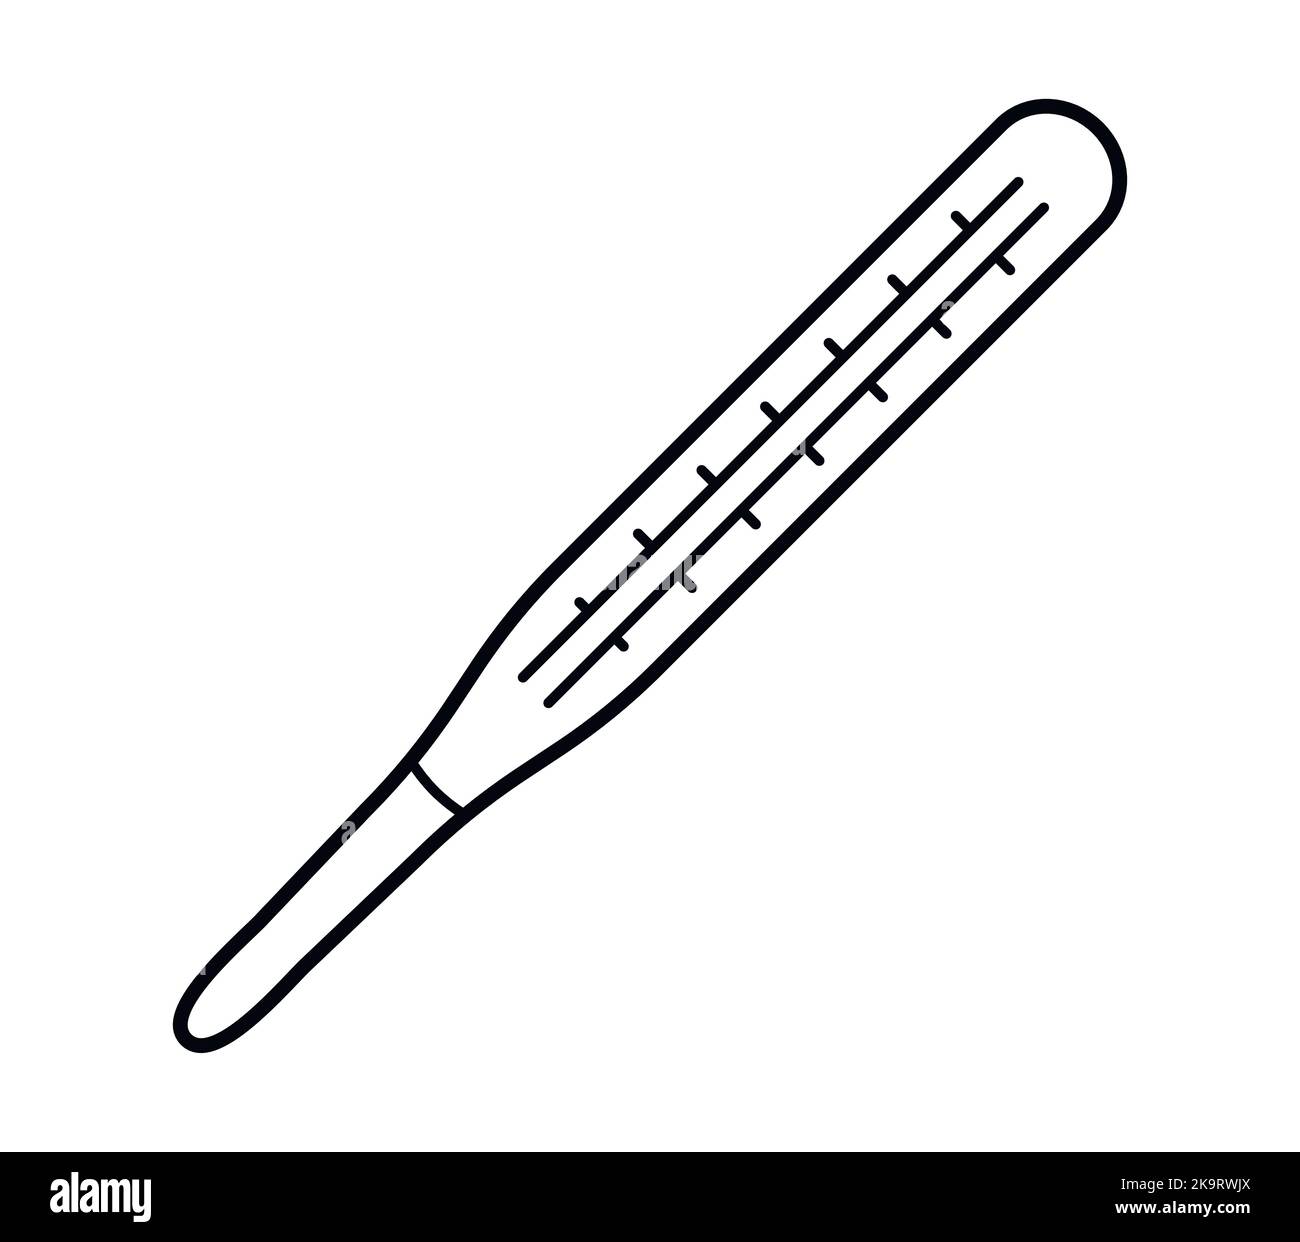 Medical mercury thermometer vector icon Stock Vector